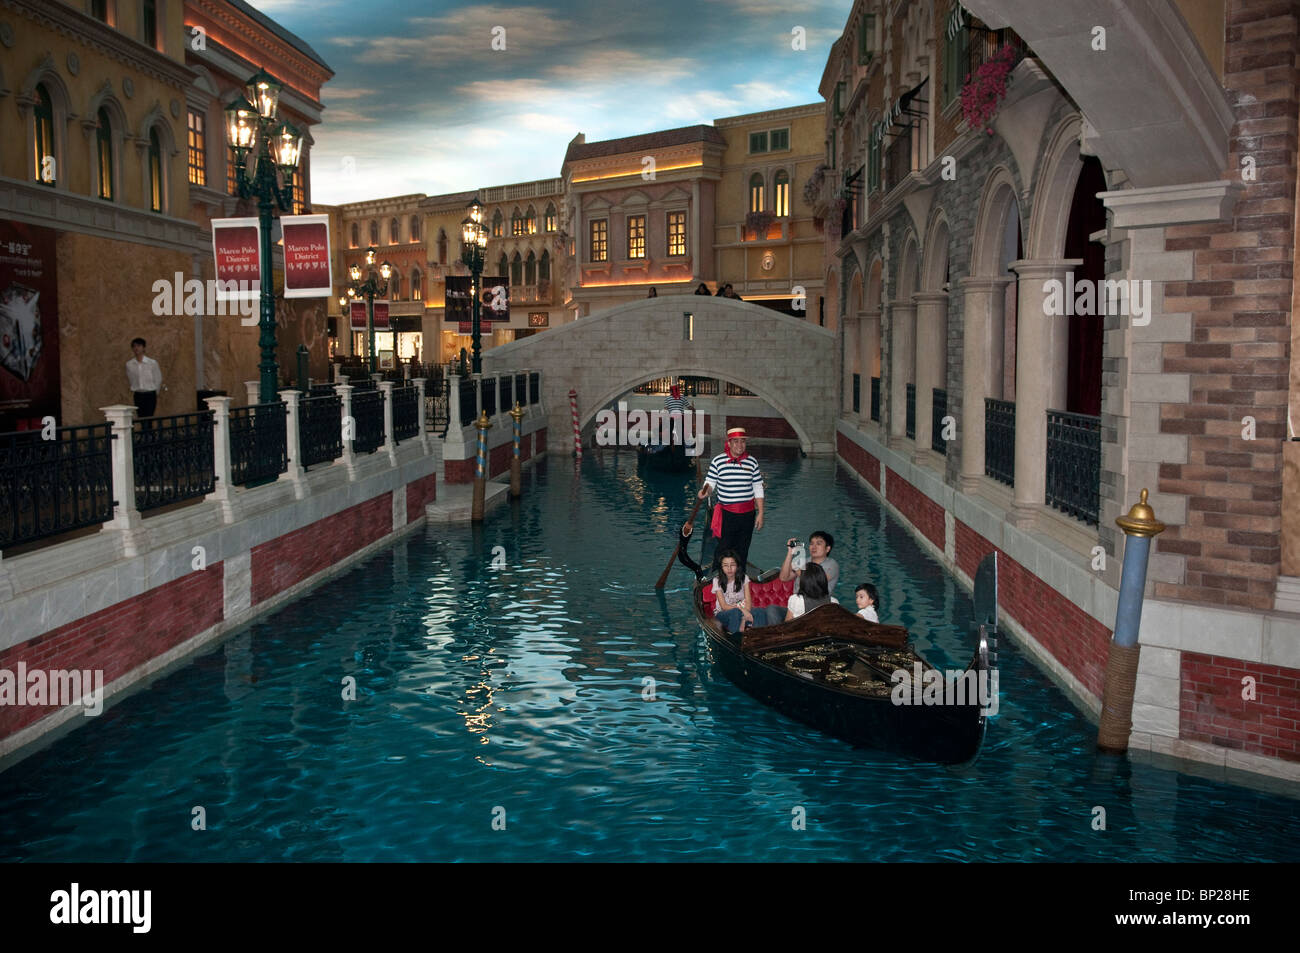 The Venetian Macao is a hotel and casino resort in Macau owned by the Las Vegas Sands corporation. Stock Photo